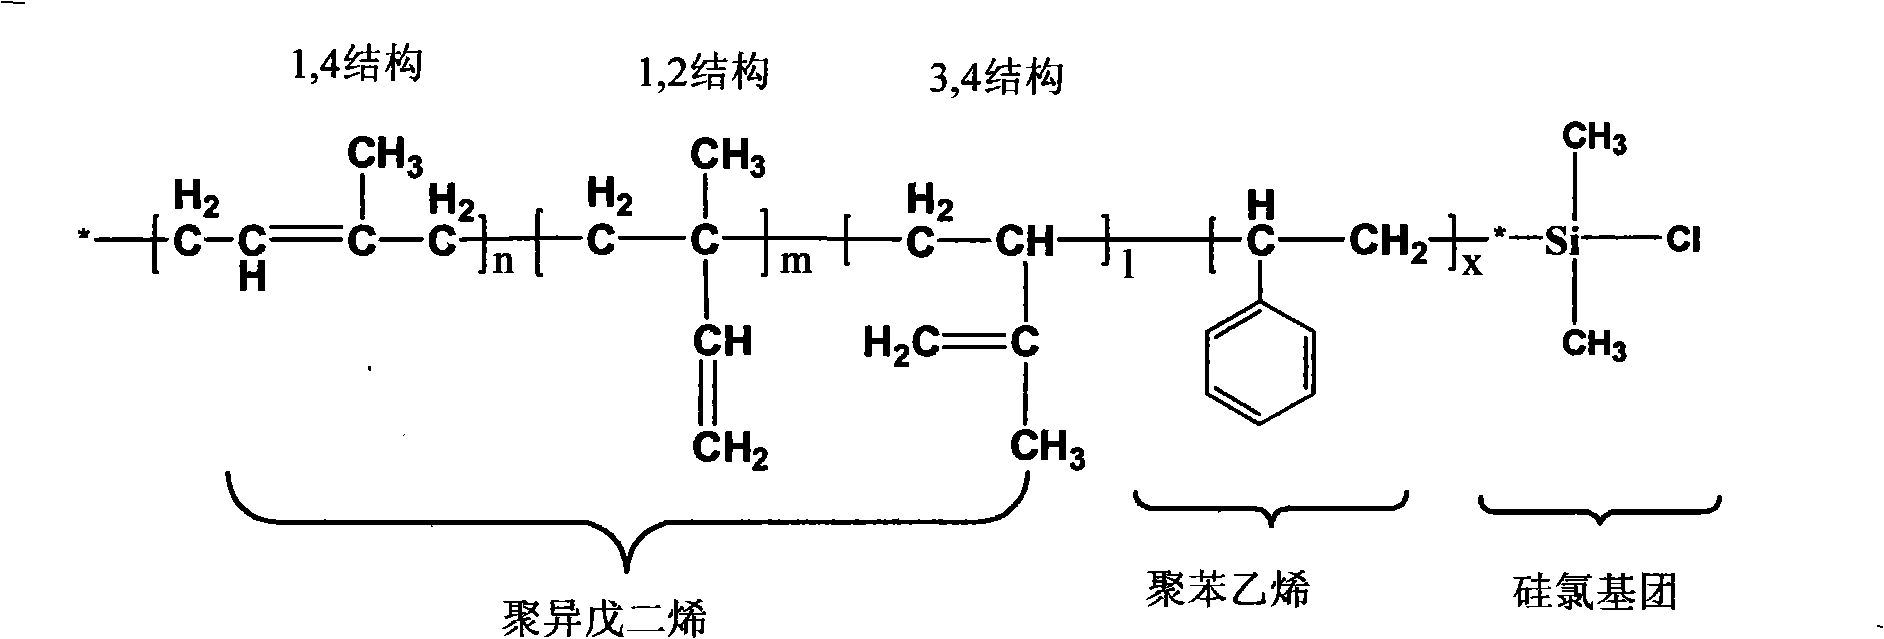 Initiation system for polymerization of star-branched polyisobutene or isobutene-diene rubber positive ion